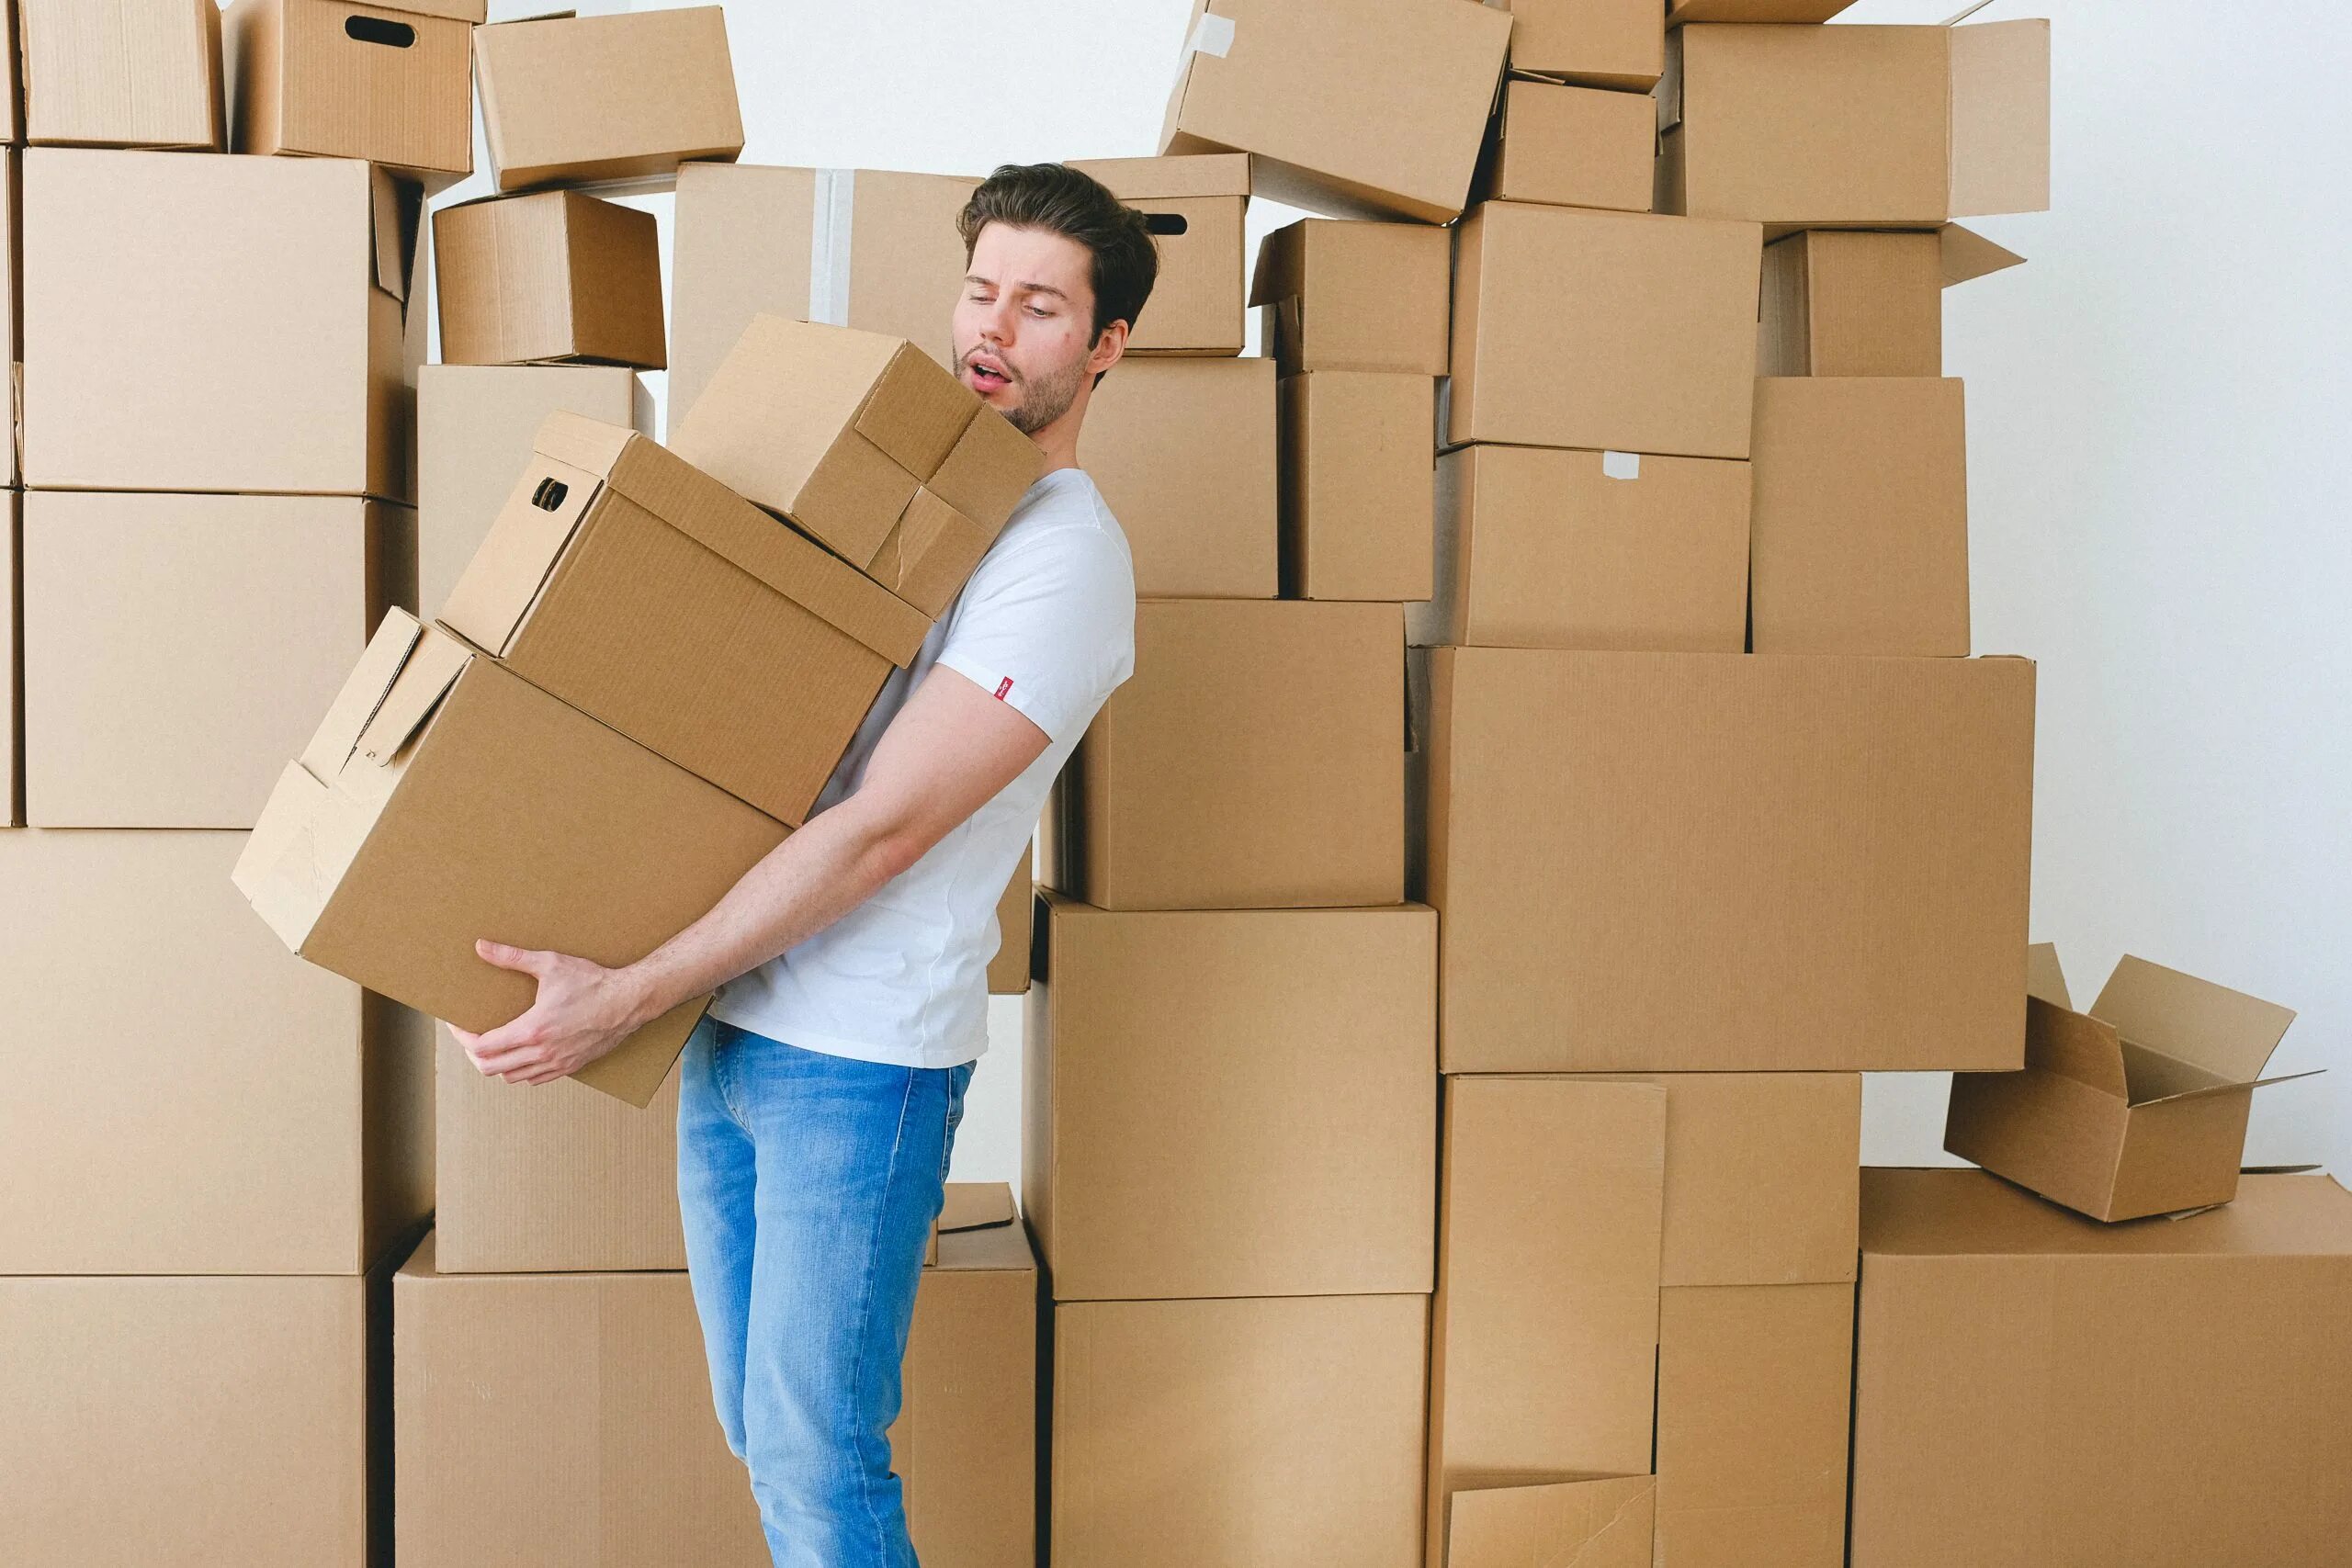 Move package. Погрузка картонных коробок. Доставка мебели. Moving House and Packing. Movers and Packers.